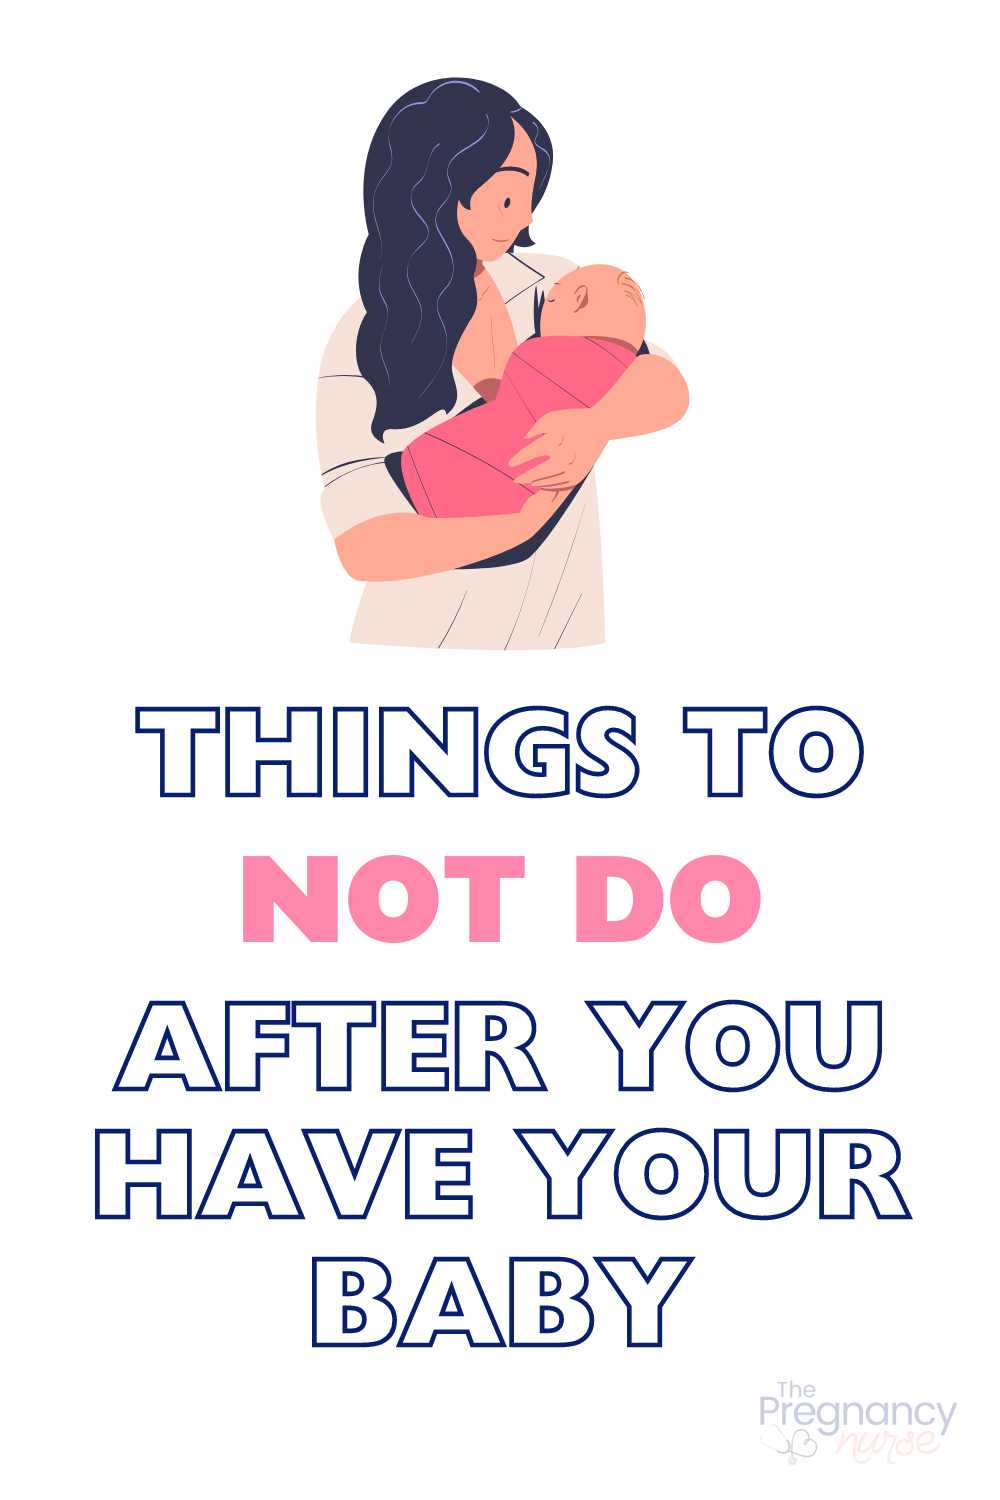 mom and newborn baby postpartum // things to NOT DO after you have your baby